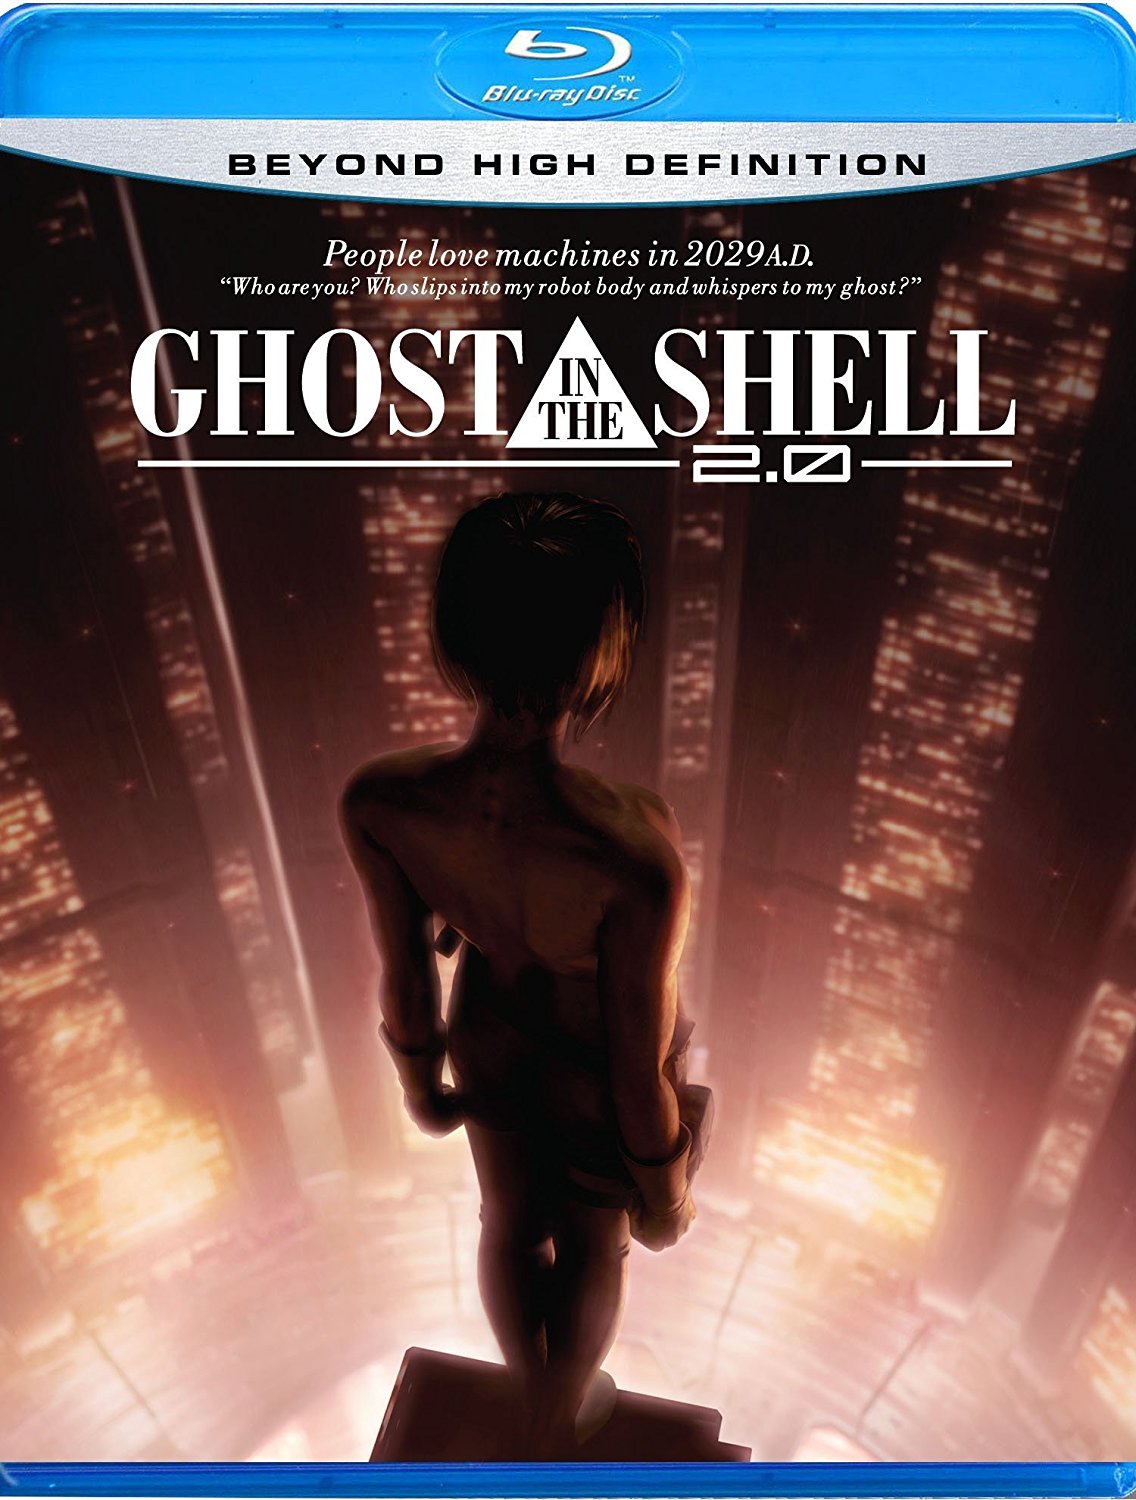 Ghost In The Shell 2.0 #2